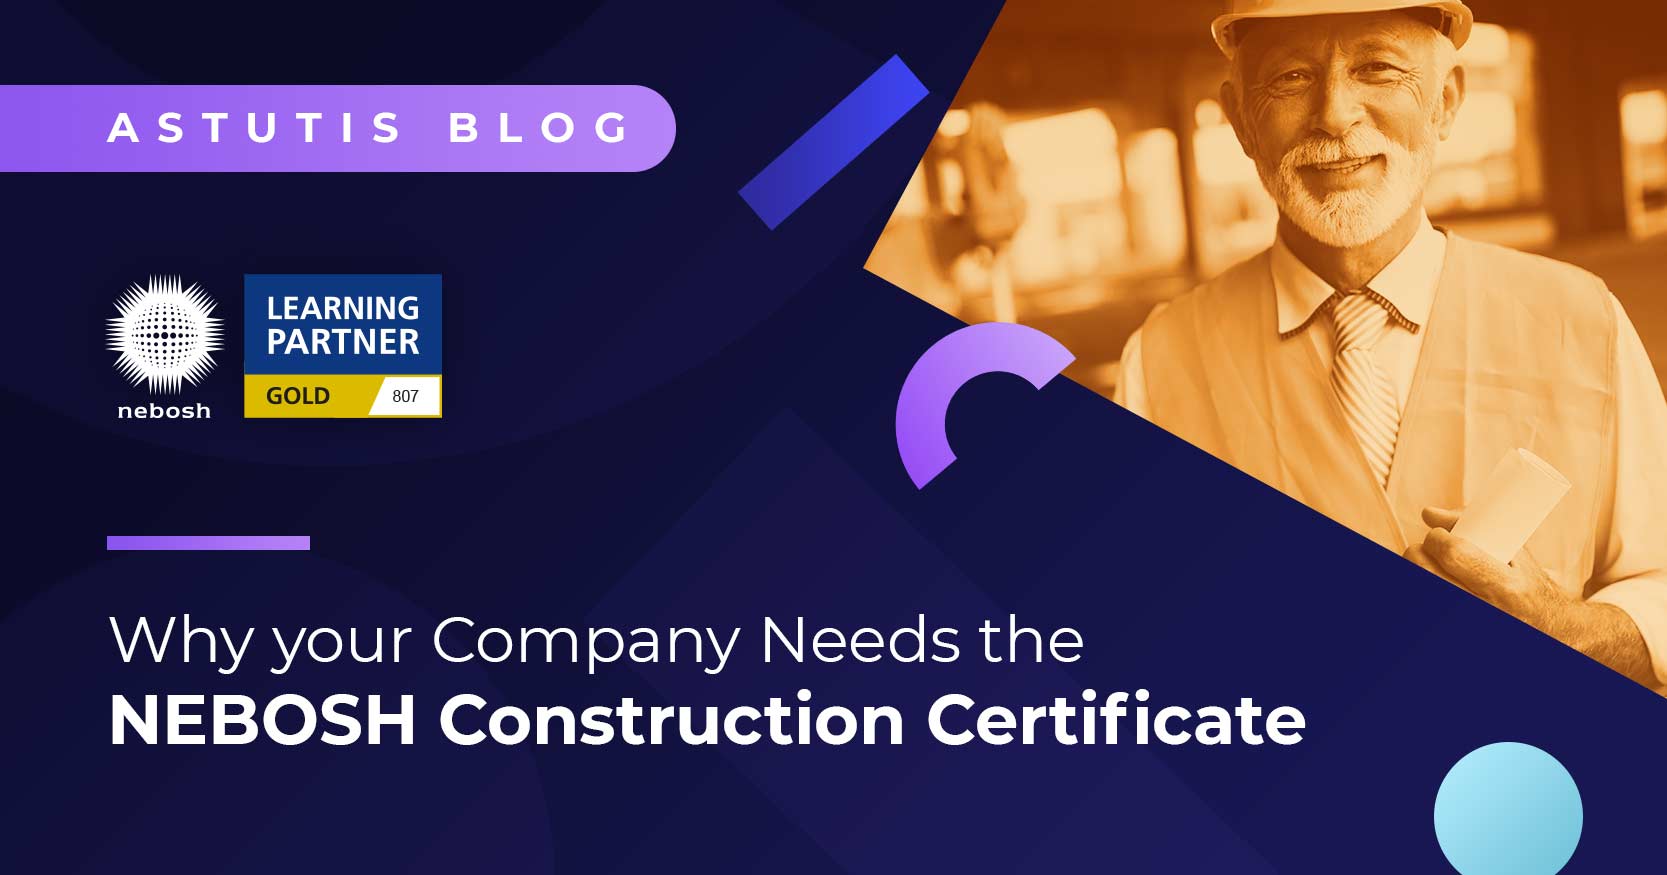 Why Your Organisation Needs the NEBOSH Construction Certificate  Image